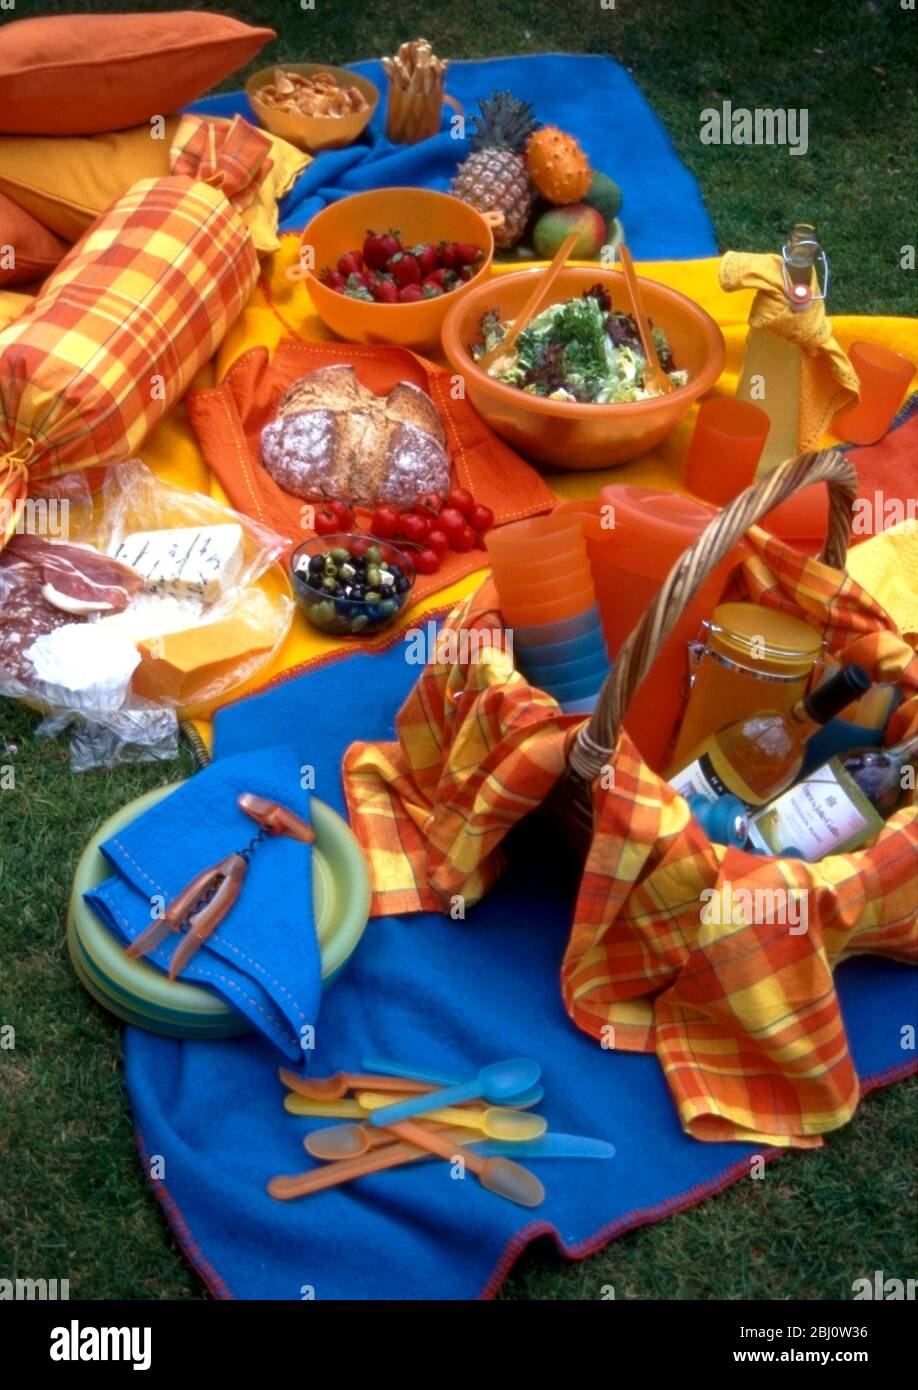 Brightly coloured picnic accessories arranged on grass, with basket of wine bottles, cheeses and salads - Stock Photo